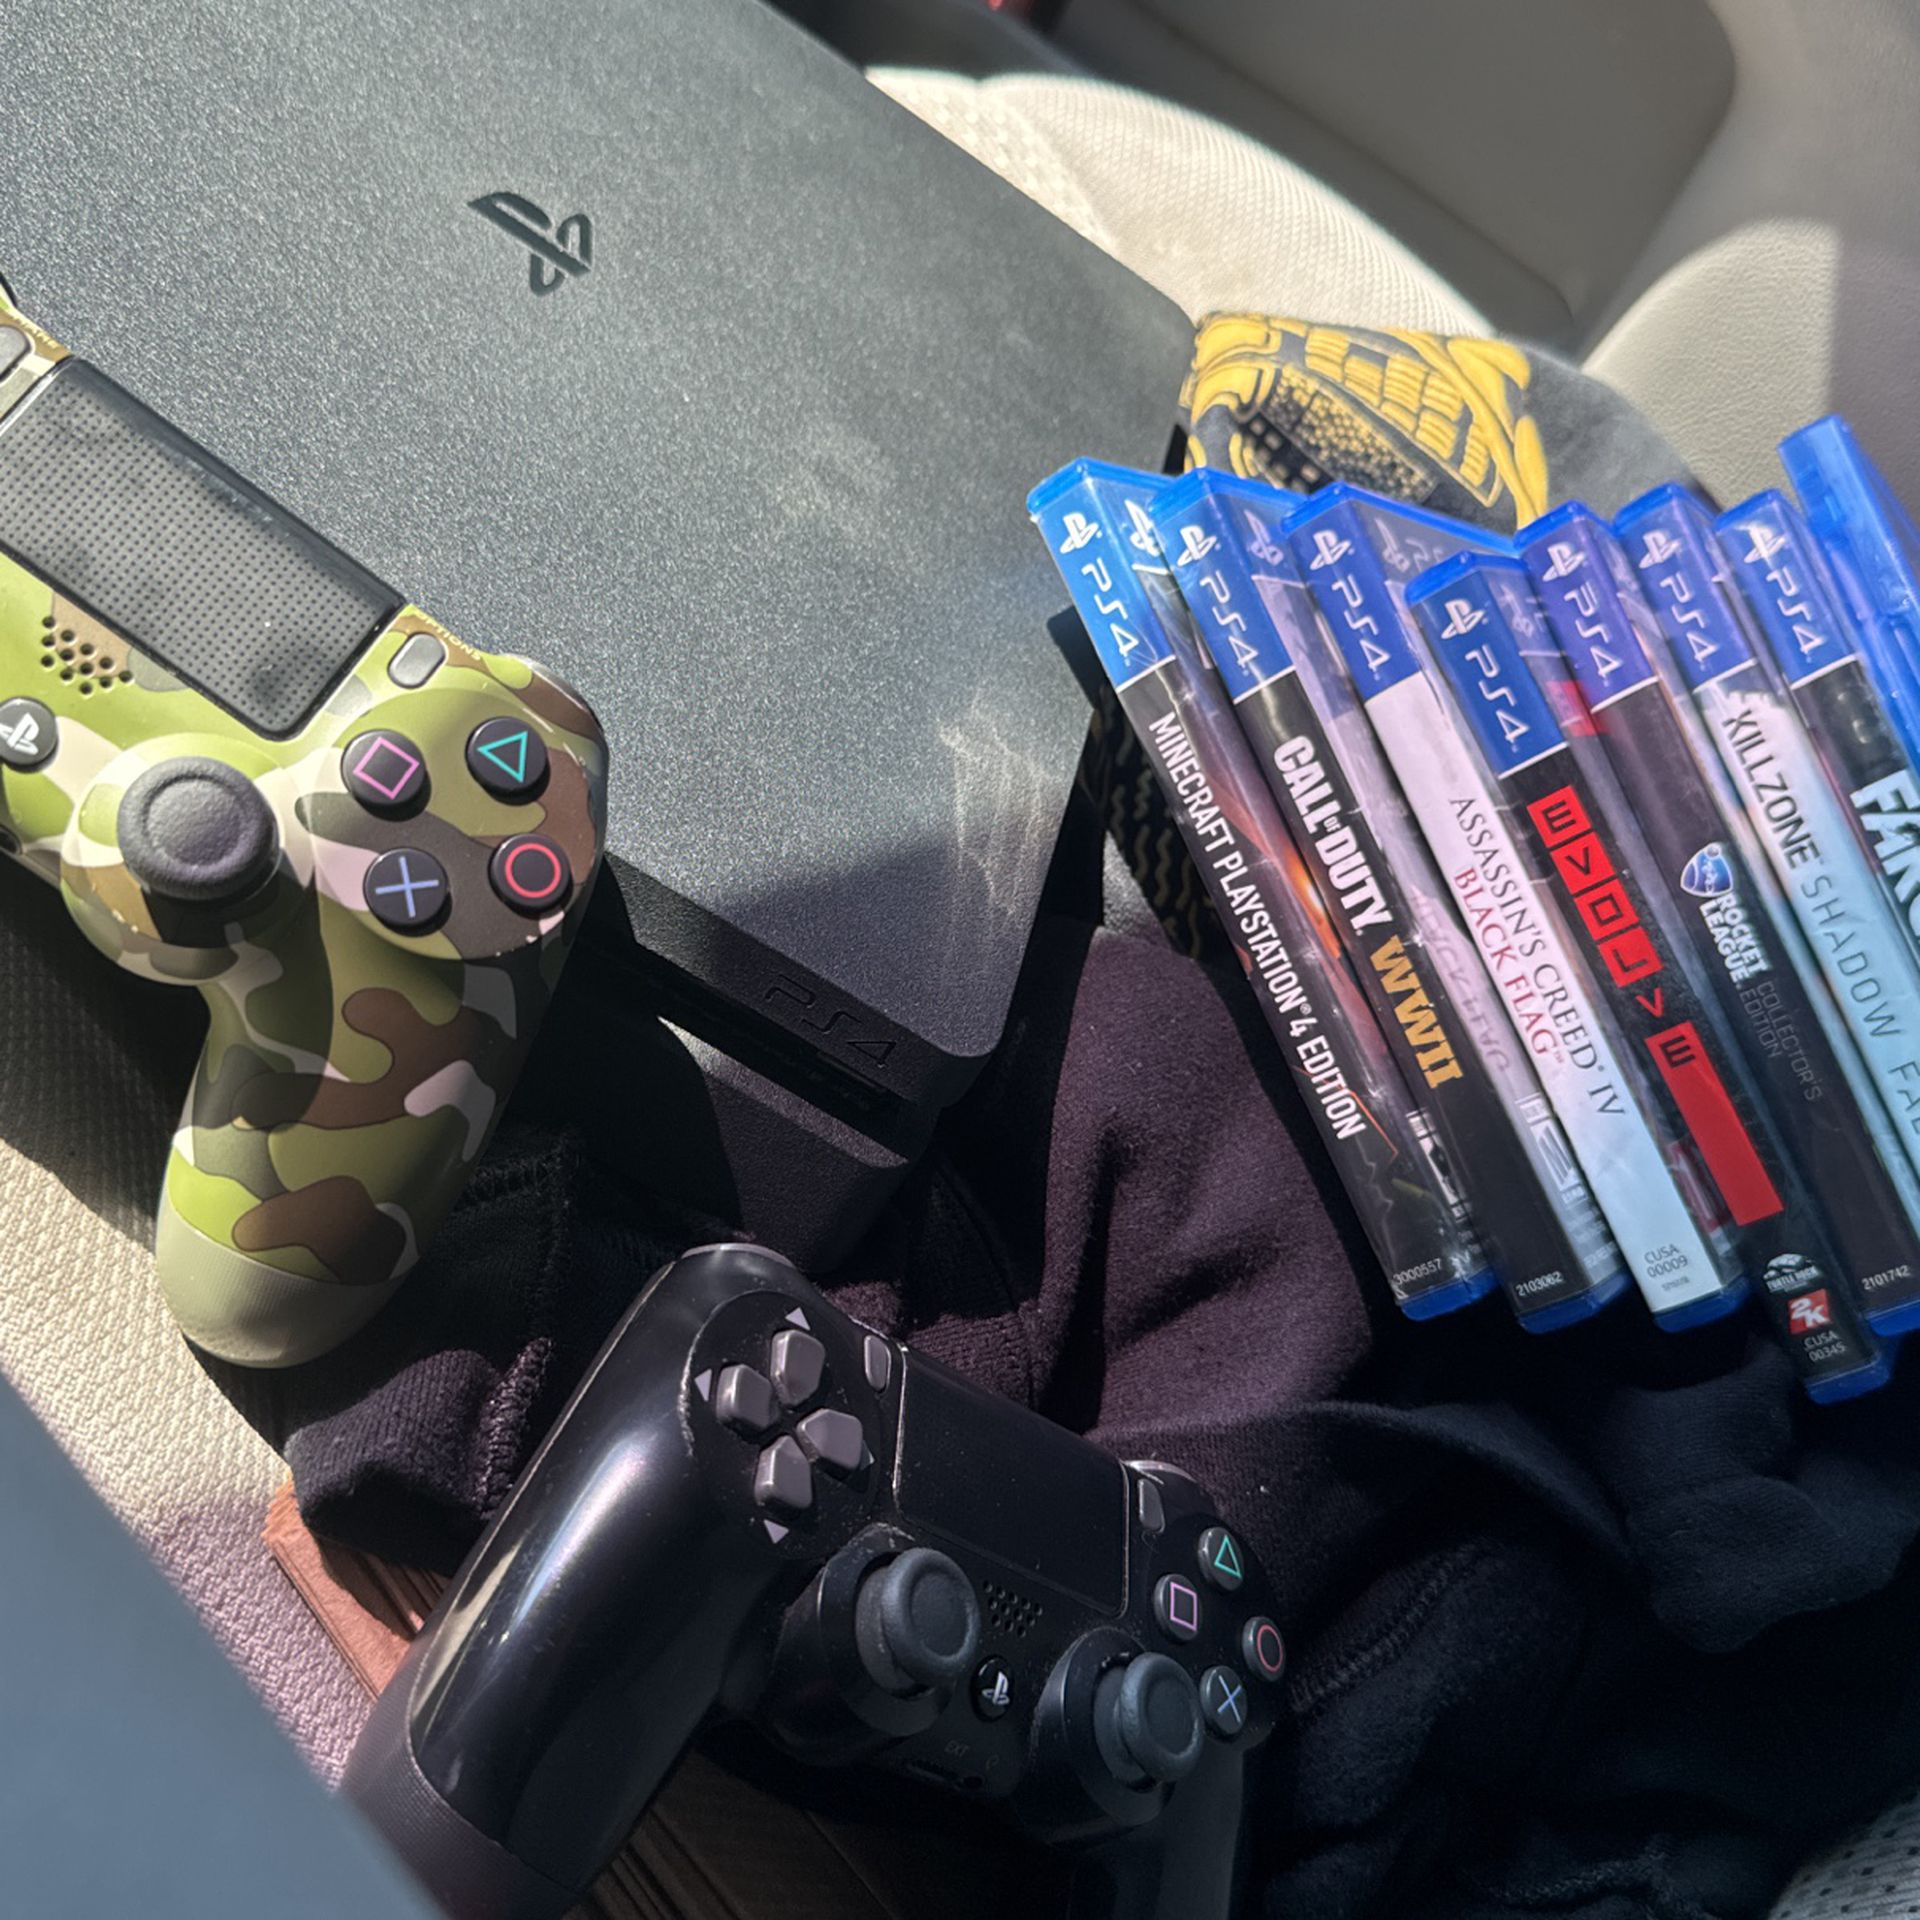 Playstation 4 One Terabyte, Two Controllers, And Eight Games